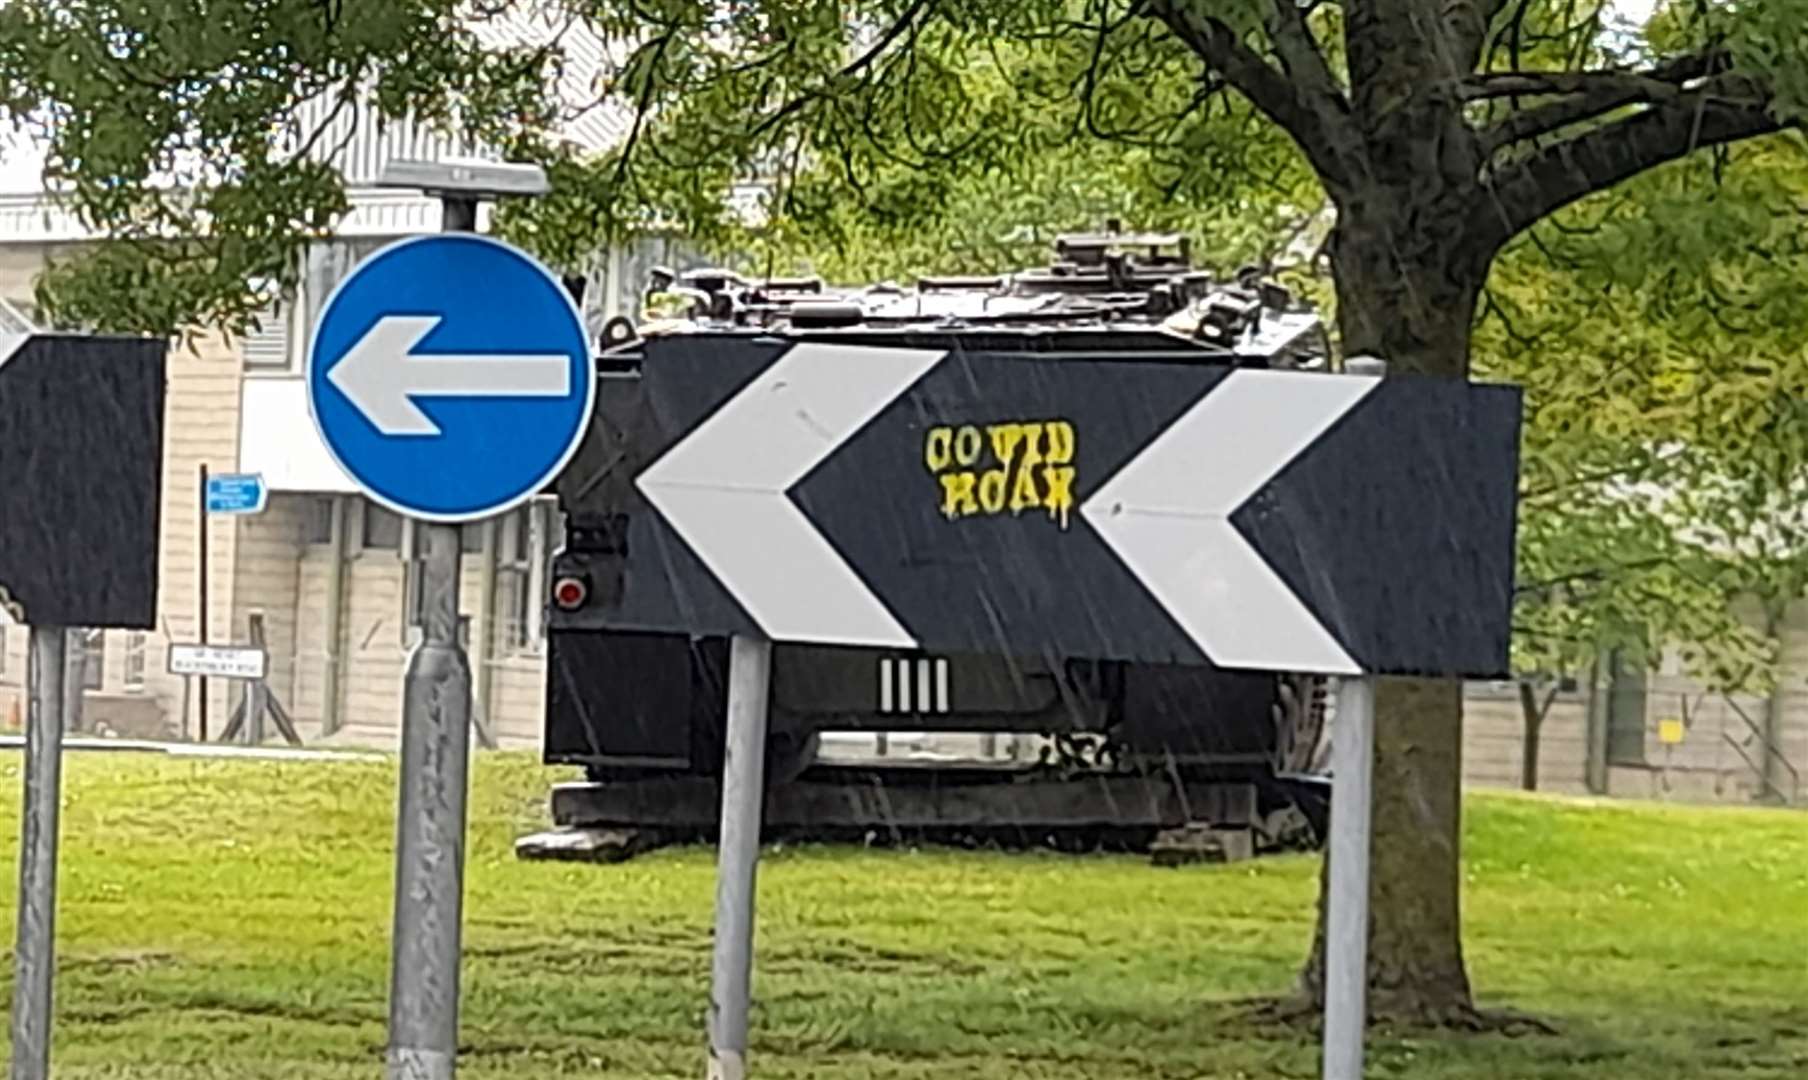 'Covid hoax' has been spray painted on the 'tank roundabout' in Chart Road